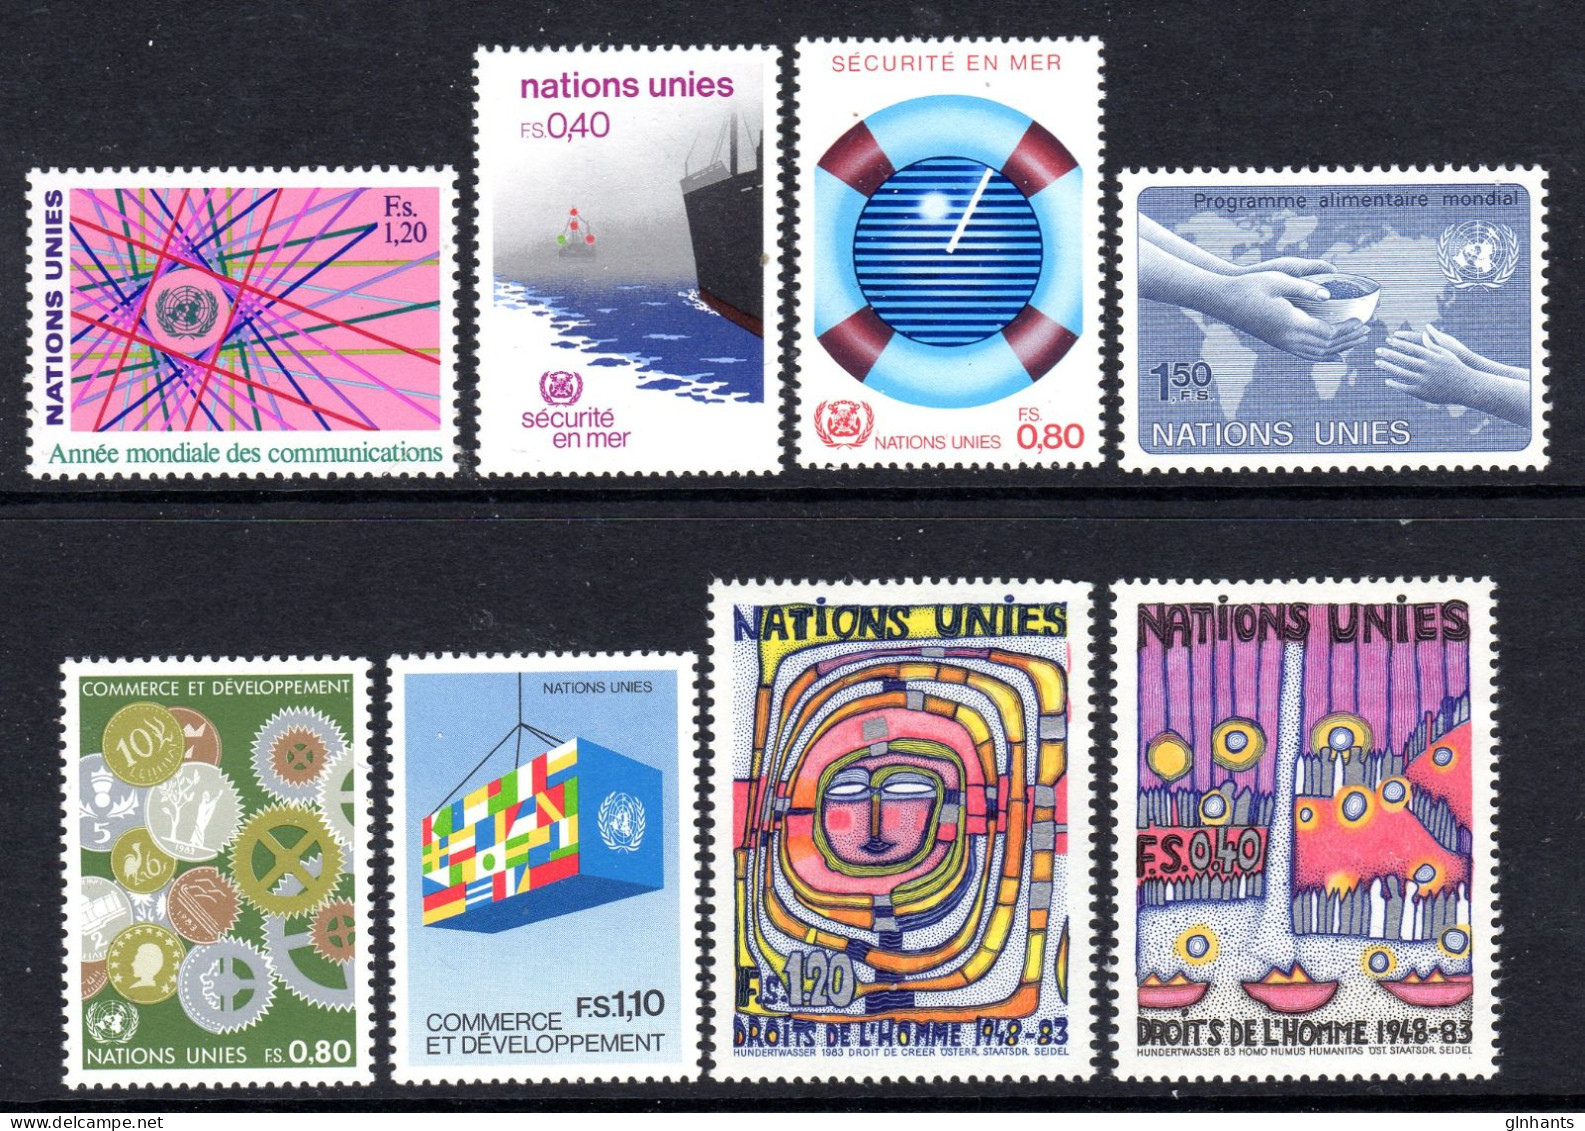 UNITED NATIONS UN GENEVA - 1983 COMPLETE YEAR SET (8V) AS PICTURED FINE MNH ** SG G113-G120 - Nuevos